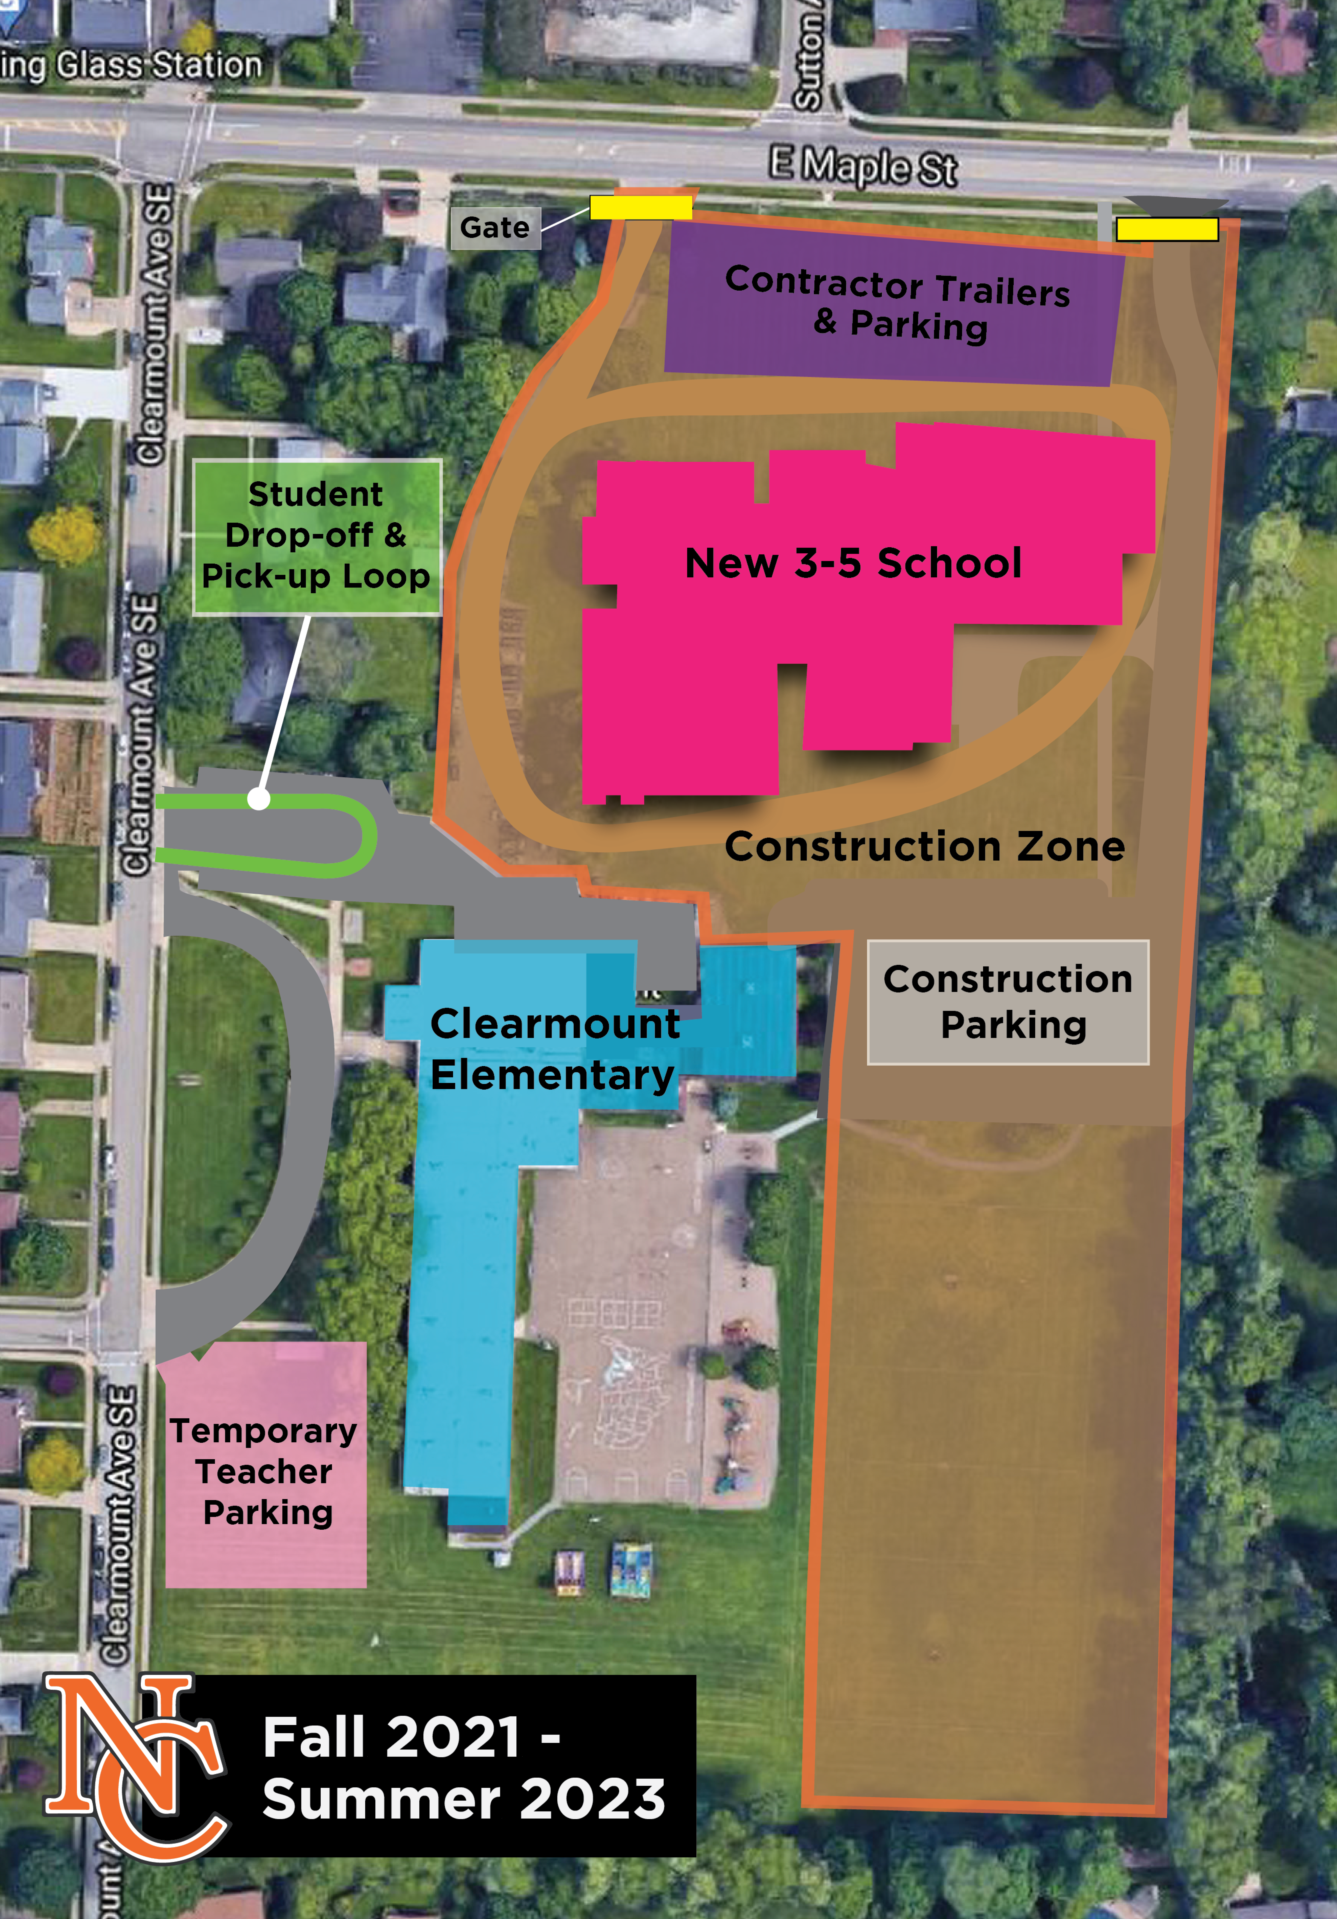 site map for the construction area at Clearmount Elementary